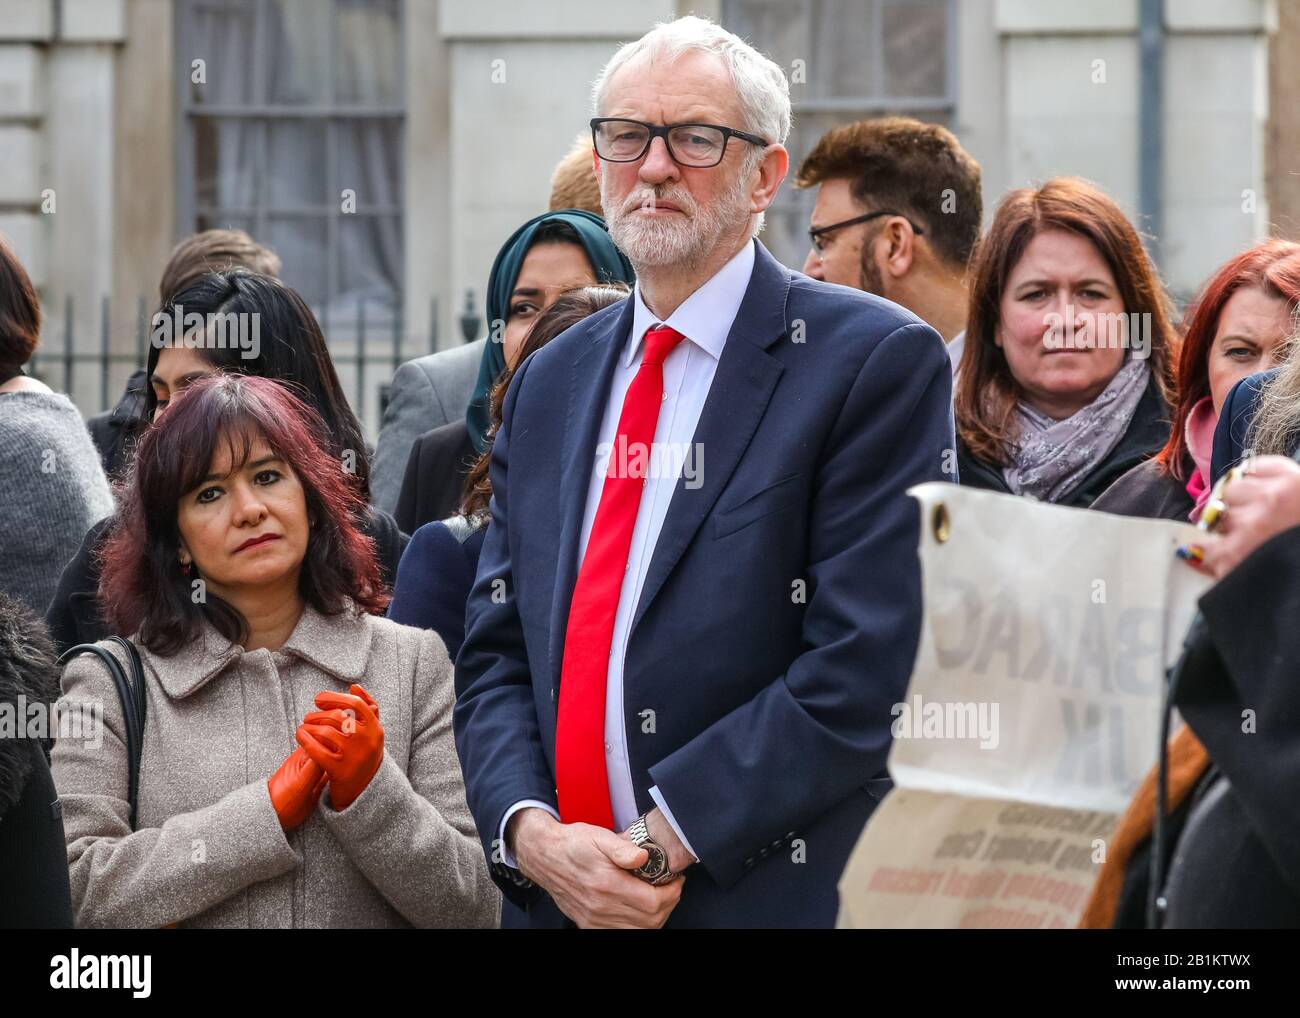 Westminster, London, UK. 26th Feb, 2020. Jeremy Corbyn with wife Laura Alvarez on his left. Labour Leader Jeremy Corbyn, as well as John Mc Donnell, Dawn Butler, and Labour Chairman Ian Lavery and others speak at a protest organised by the PCS (Public and Commercial Services Union) supporting striking Interserve Workers. Outsourced facilities management workers at the Foreign and Commonwealth Office (FCO) in London began their strike period in November, because Interserve are not willing to recognise PCS. Credit: Imageplotter/Alamy Live News Stock Photo